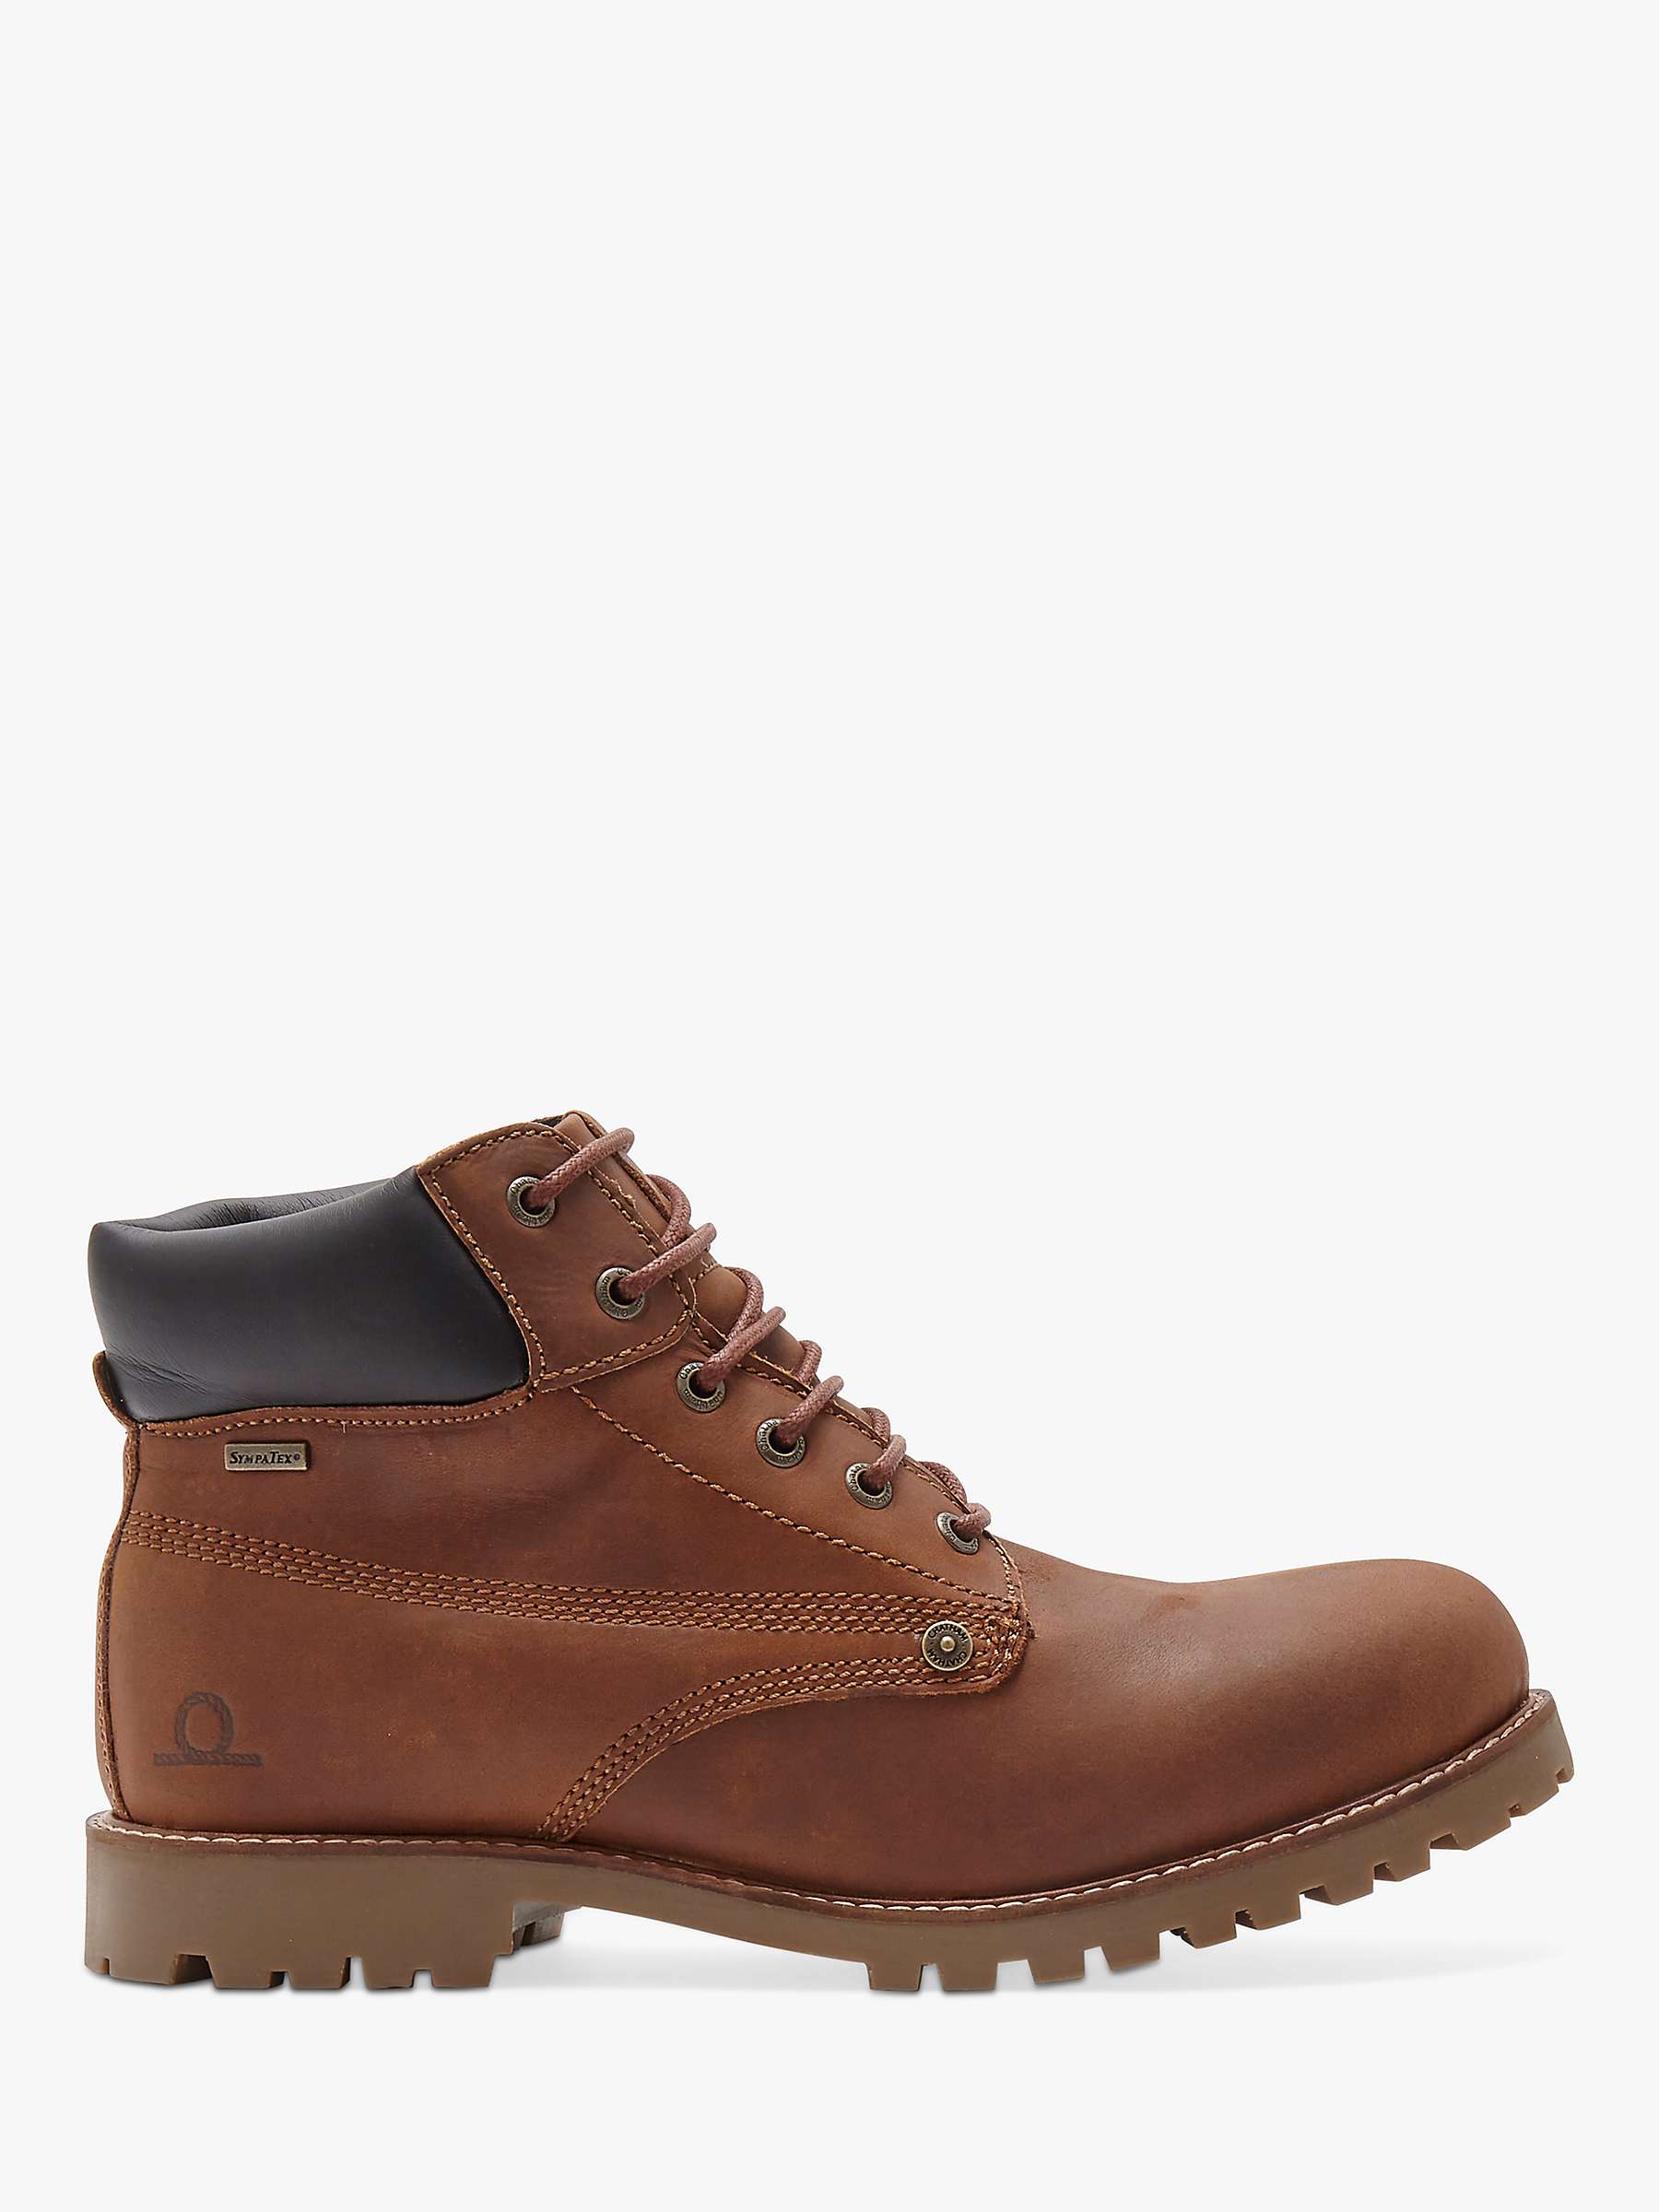 Buy Chatham Nevis Waterproof Lace Up Boots, Brown Online at johnlewis.com